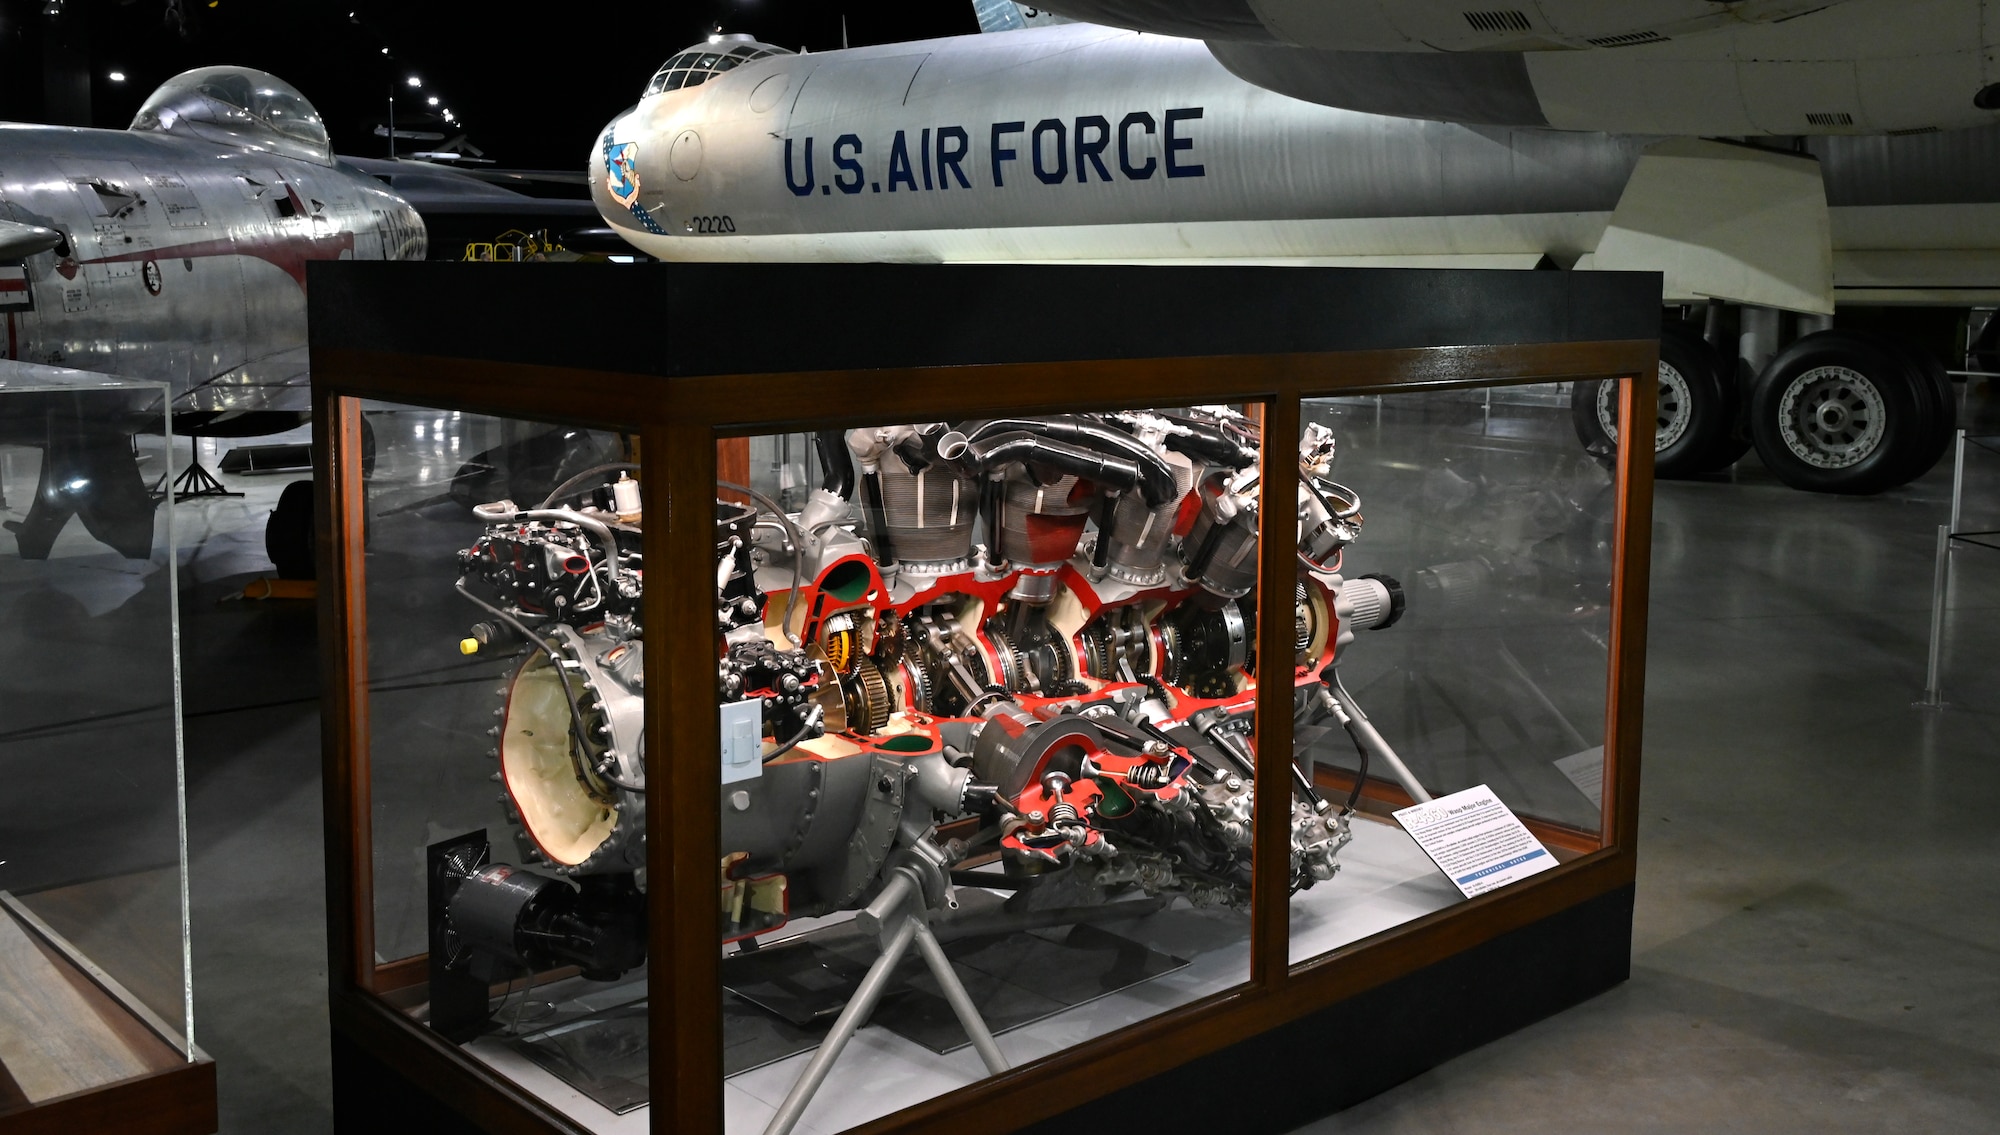 Pratt & Whitney R-4360 engine on display in the Cold War Gallery at the National Museum of the United States Air Force. (Photo by: Ty Greenlees)